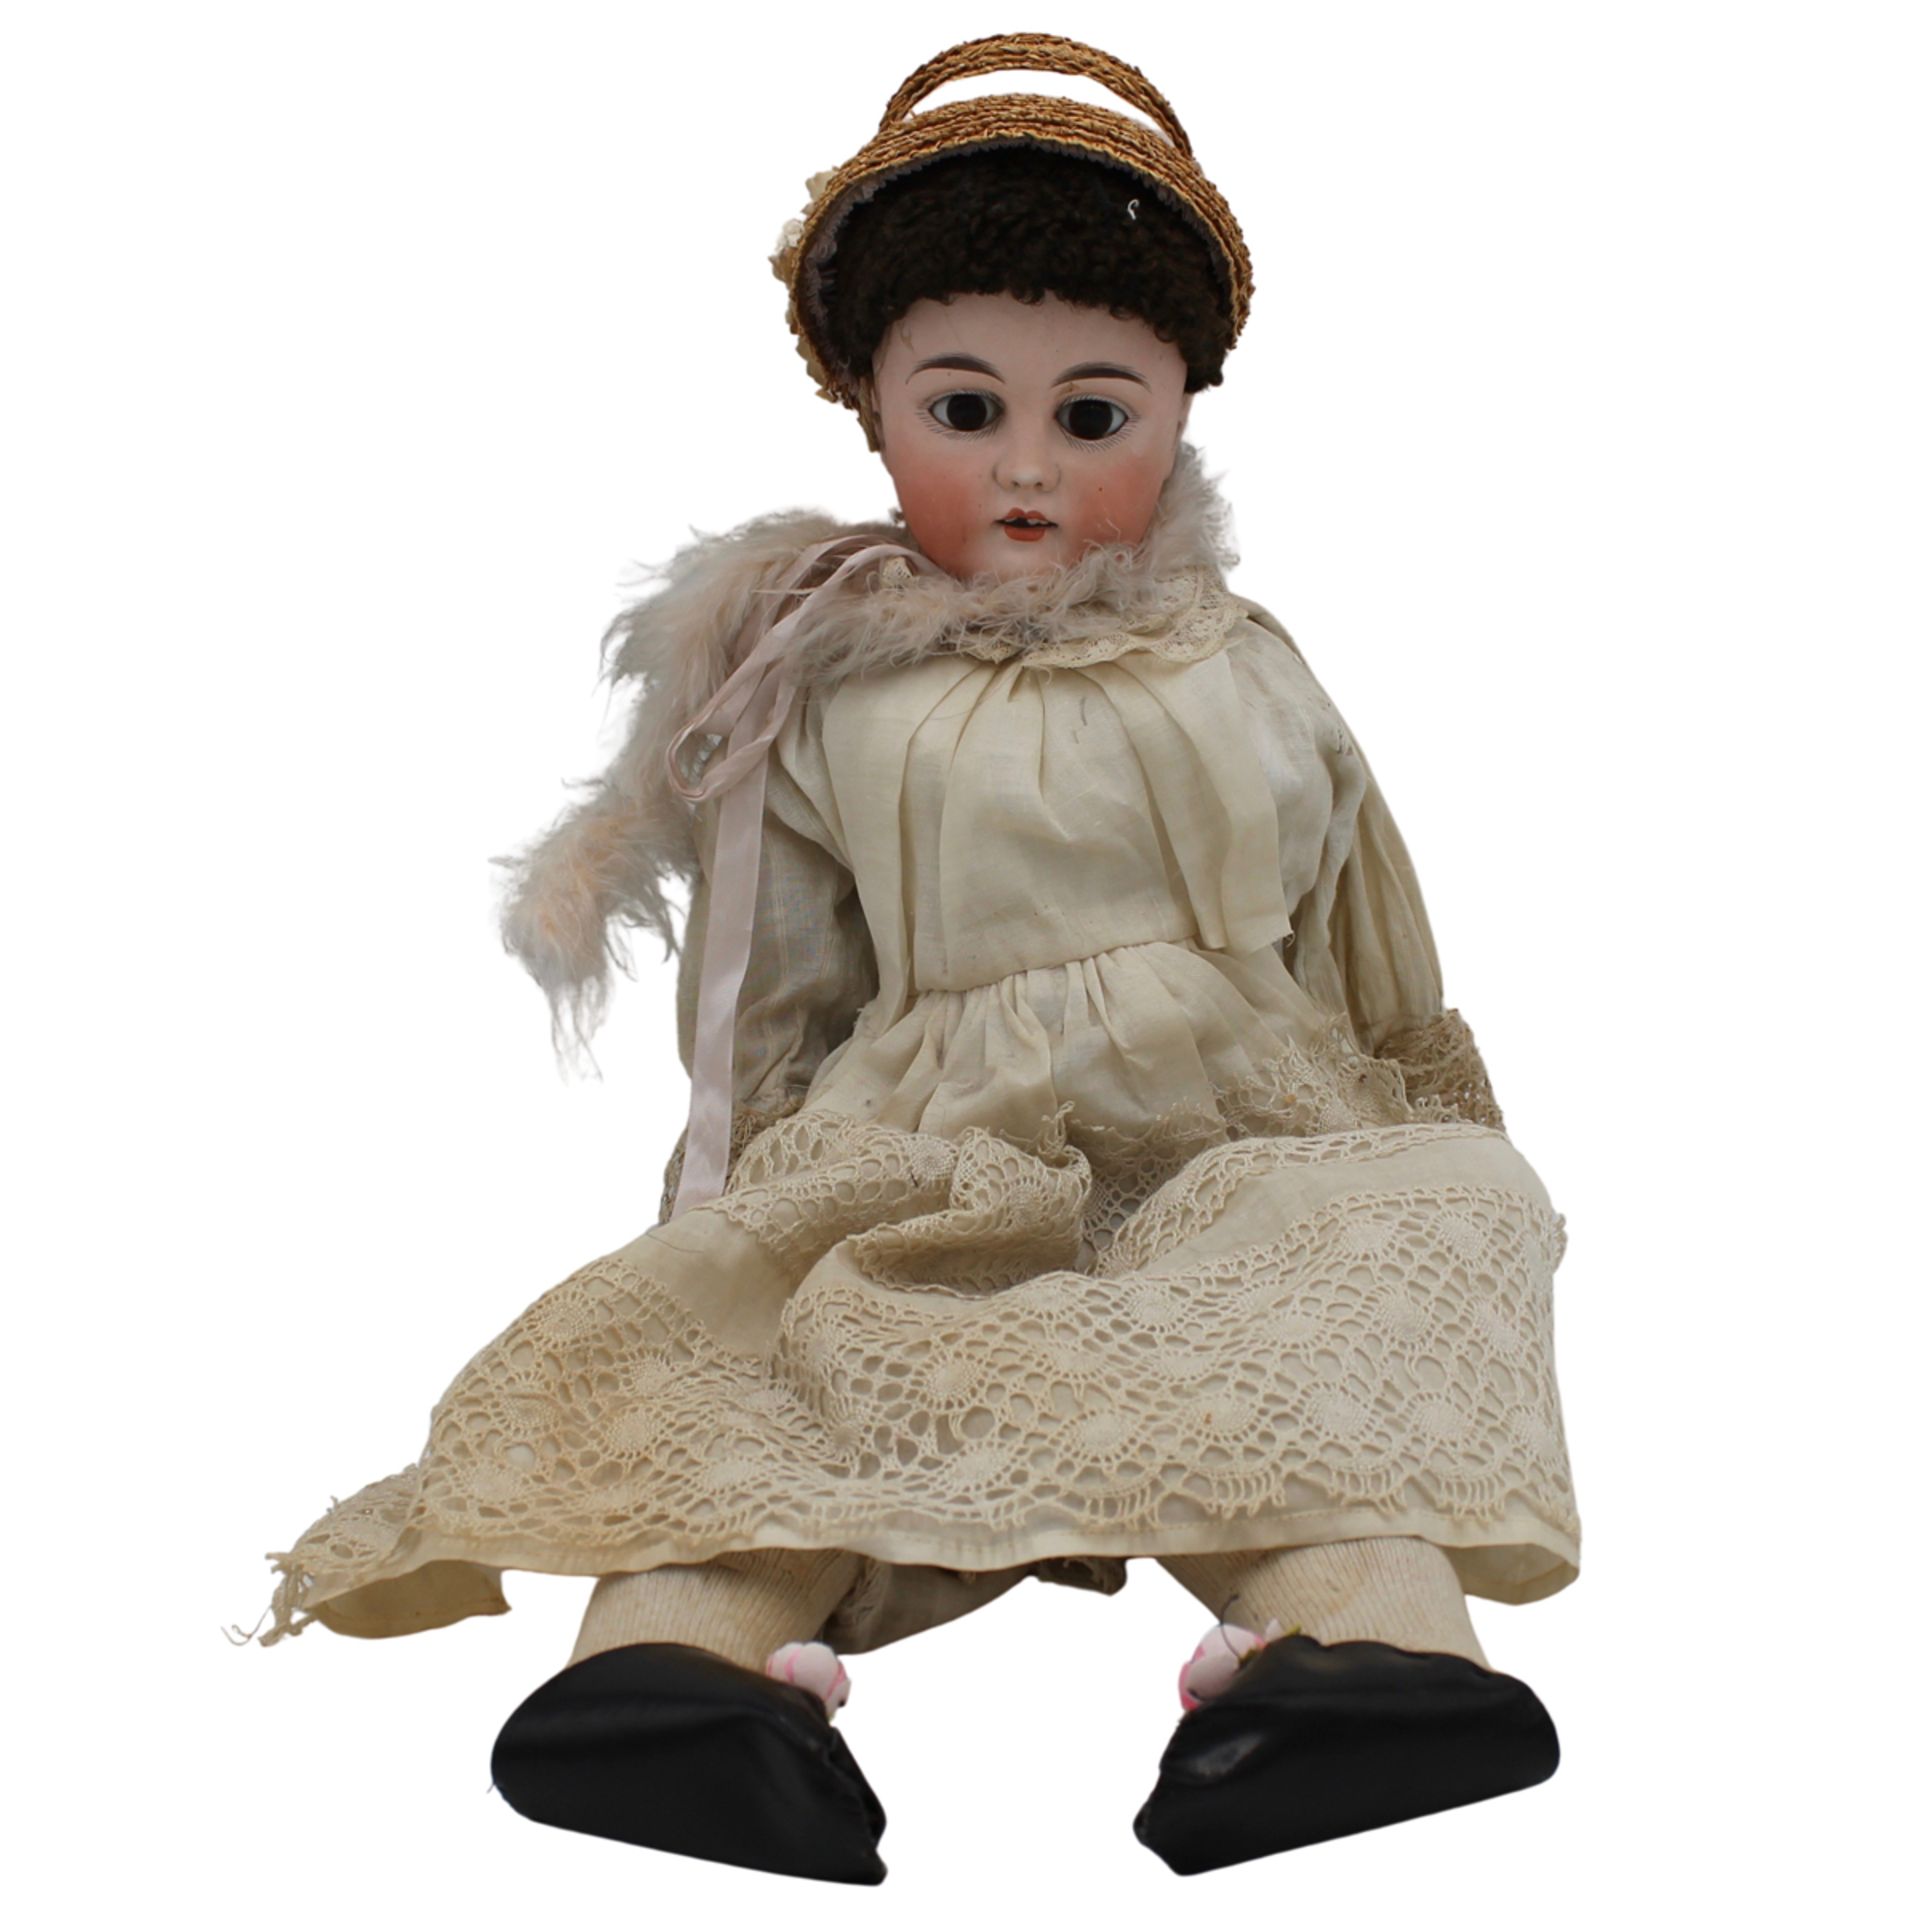 GRANDE BAMBOLA CON VOLTO IN BISQUIT - LARGE DOLL WITH FACE IN BISQUIT